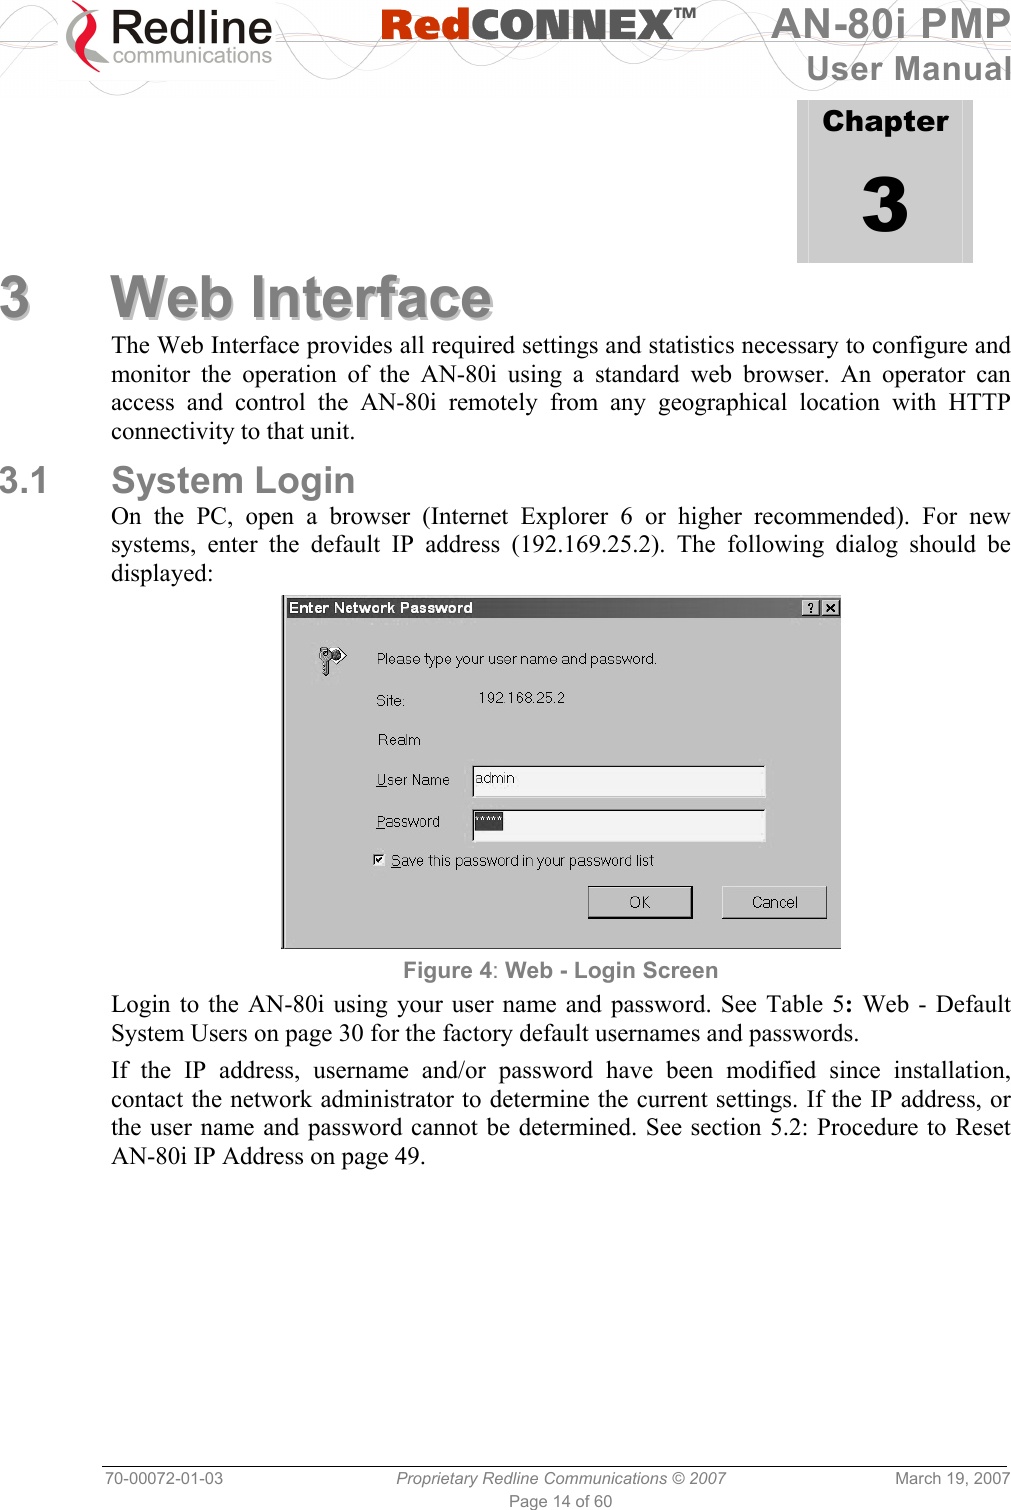   RedCONNEXTM AN-80i PMP User Manual 70-00072-01-03  Proprietary Redline Communications © 2007  March 19, 2007 Page 14 of 60             Chapter 3 33  WWeebb  IInntteerrffaaccee  The Web Interface provides all required settings and statistics necessary to configure and monitor the operation of the AN-80i using a standard web browser. An operator can access and control the AN-80i remotely from any geographical location with HTTP connectivity to that unit. 3.1 System Login On the PC, open a browser (Internet Explorer 6 or higher recommended). For new systems, enter the default IP address (192.169.25.2). The following dialog should be displayed:  Figure 4: Web - Login Screen Login to the AN-80i using your user name and password. See Table 5: Web - Default System Users on page 30 for the factory default usernames and passwords. If the IP address, username and/or password have been modified since installation, contact the network administrator to determine the current settings. If the IP address, or the user name and password cannot be determined. See section 5.2: Procedure to Reset AN-80i IP Address on page 49. 